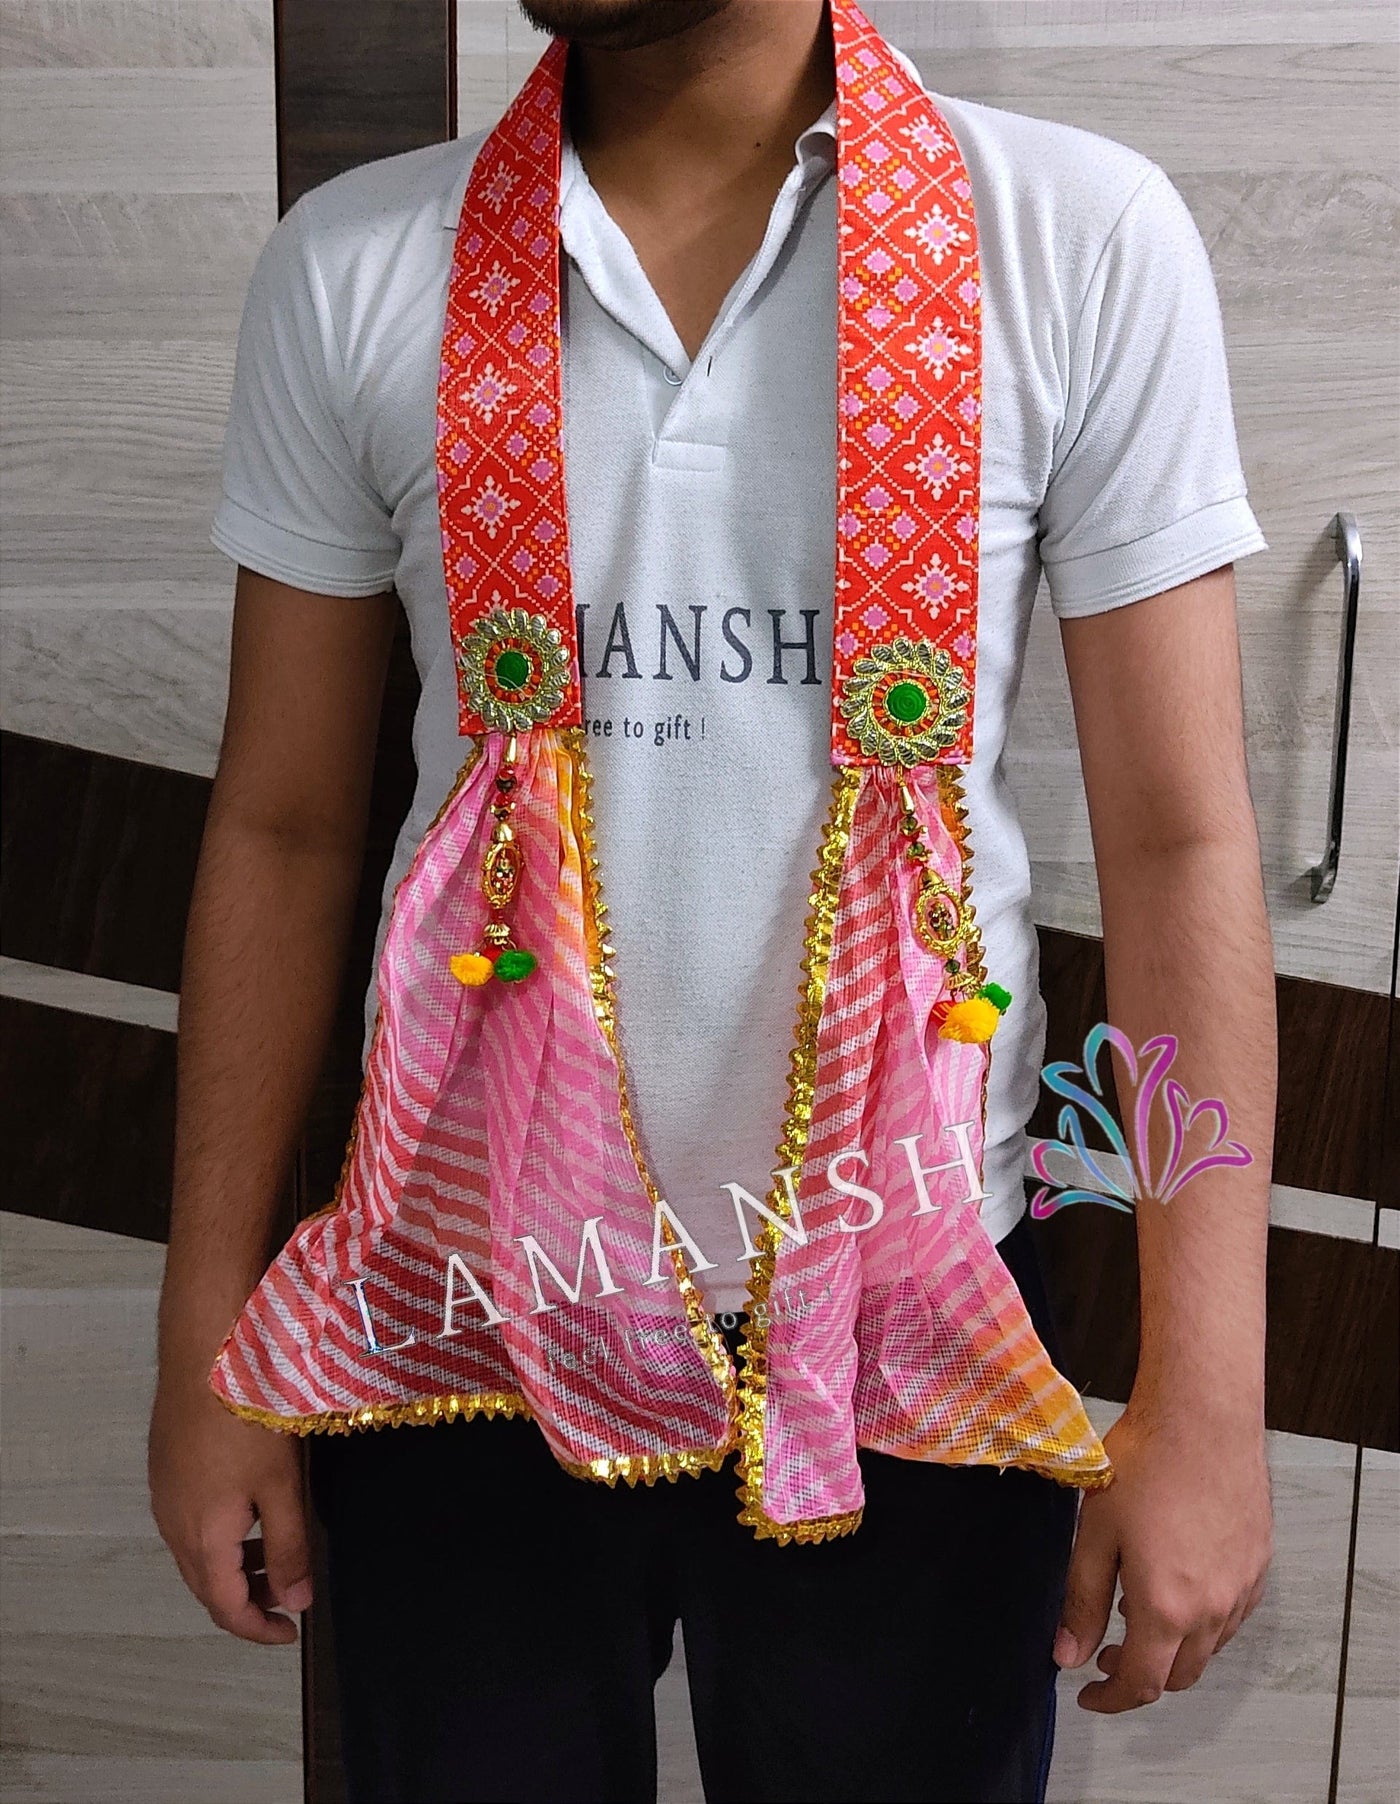 Lamansh guests welcome stoles Assorted Colours / Fabric / 20 LAMANSH® 20 pc Barati Guests Swagat Stoles / Dupatta / Fabric Mala's For Wedding ceremony / Stoles for greeting guests / Best for Hotels & Resorts too